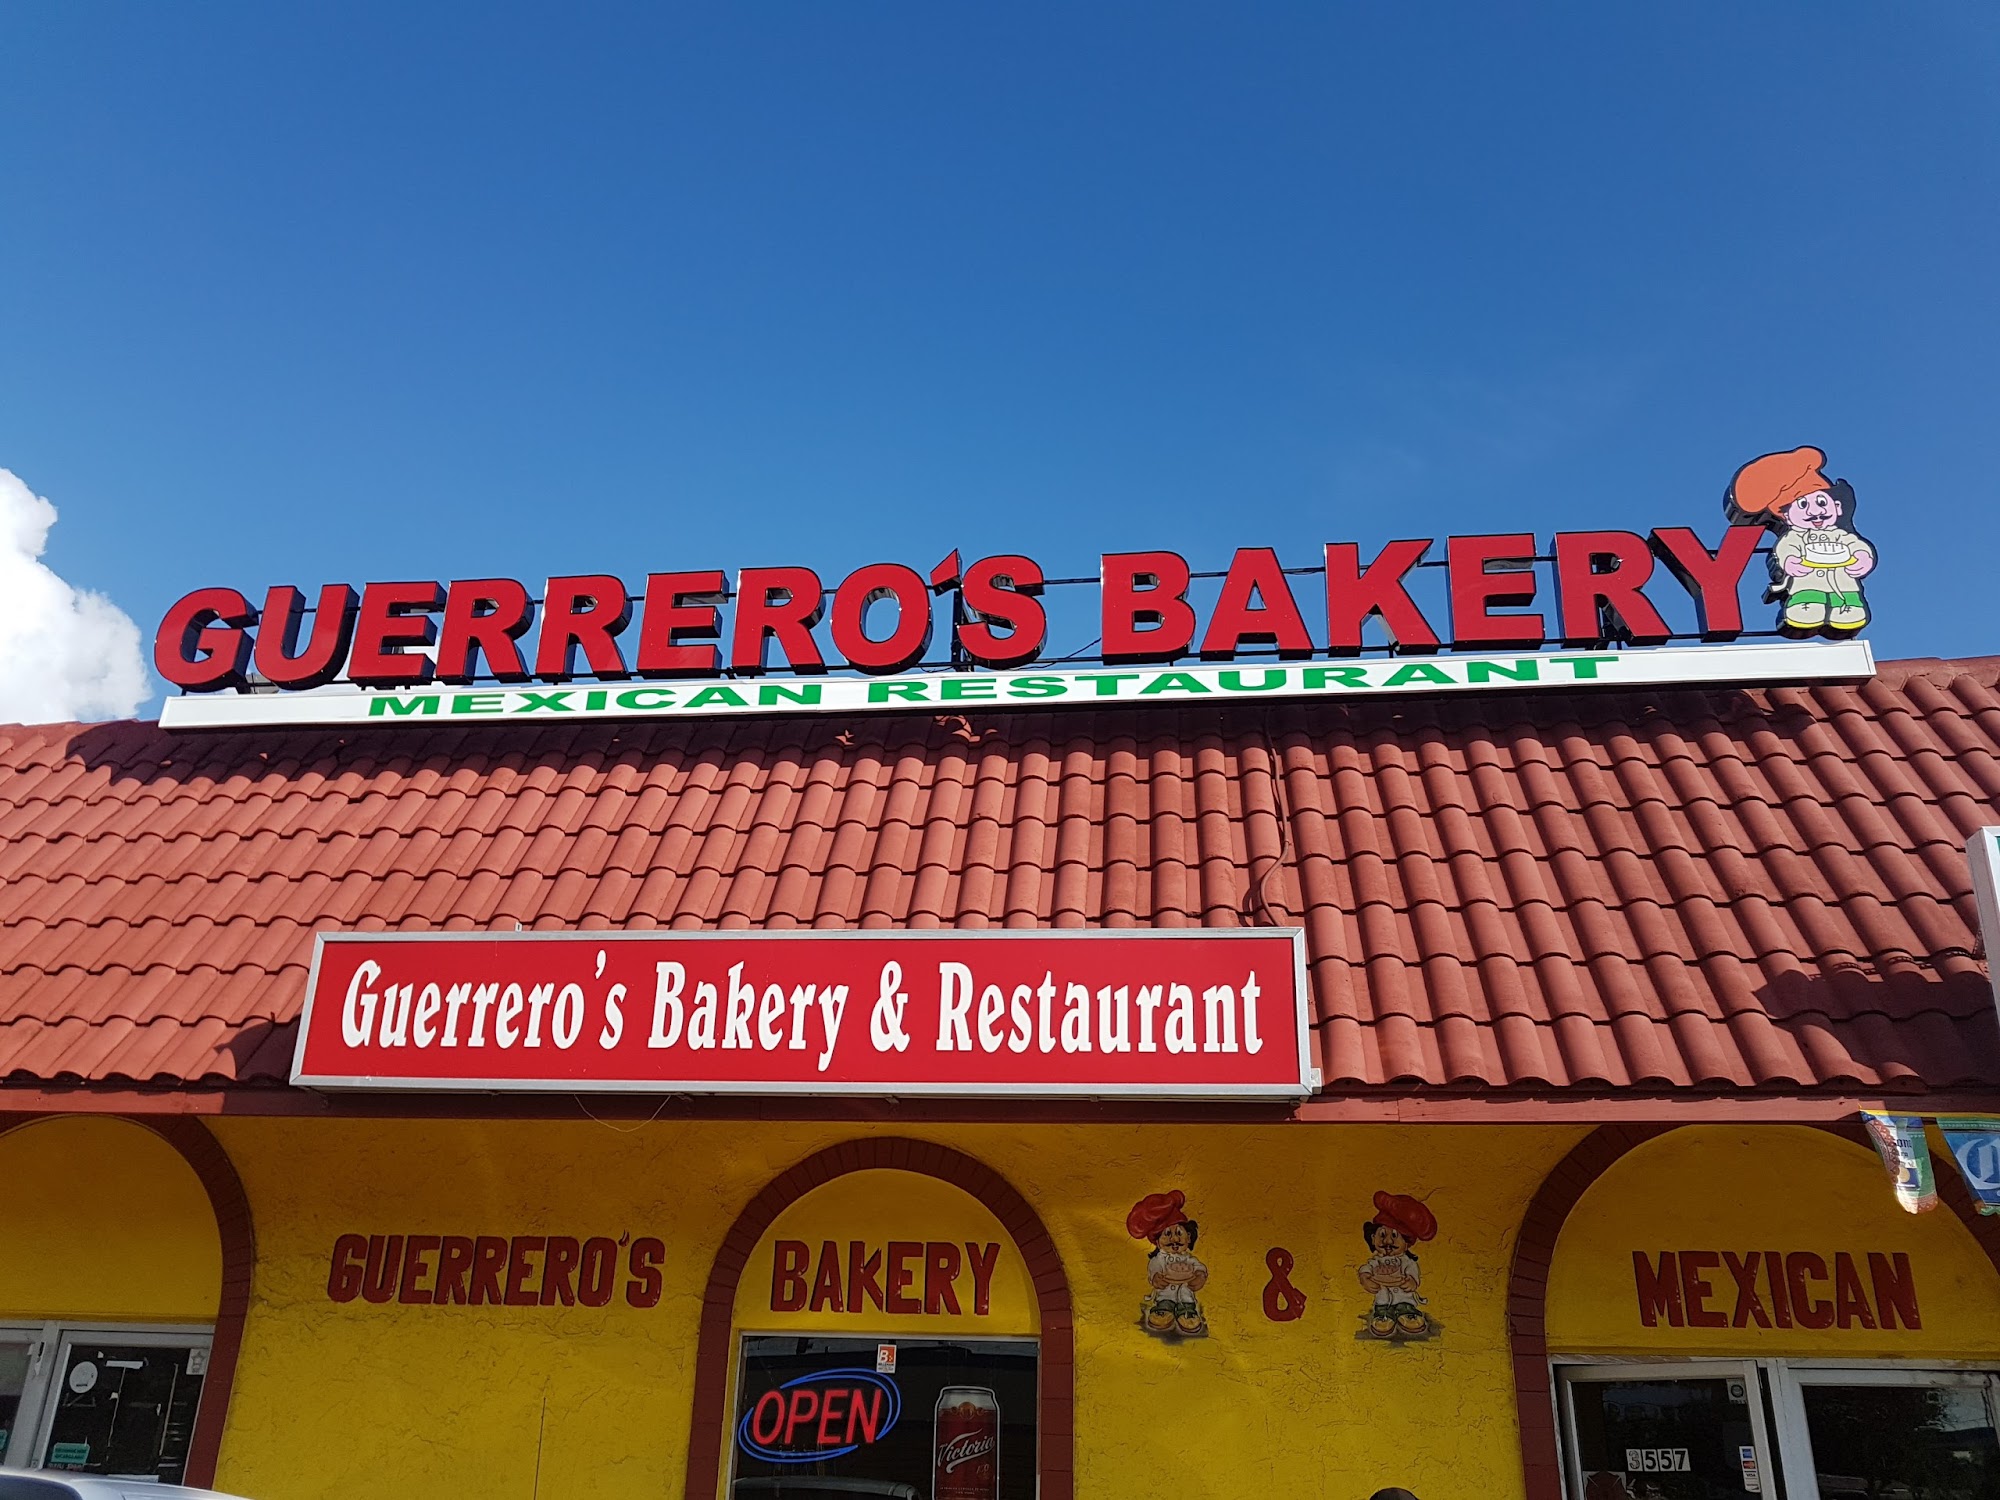 Guerrero's Bakery and Mexican Restaurant